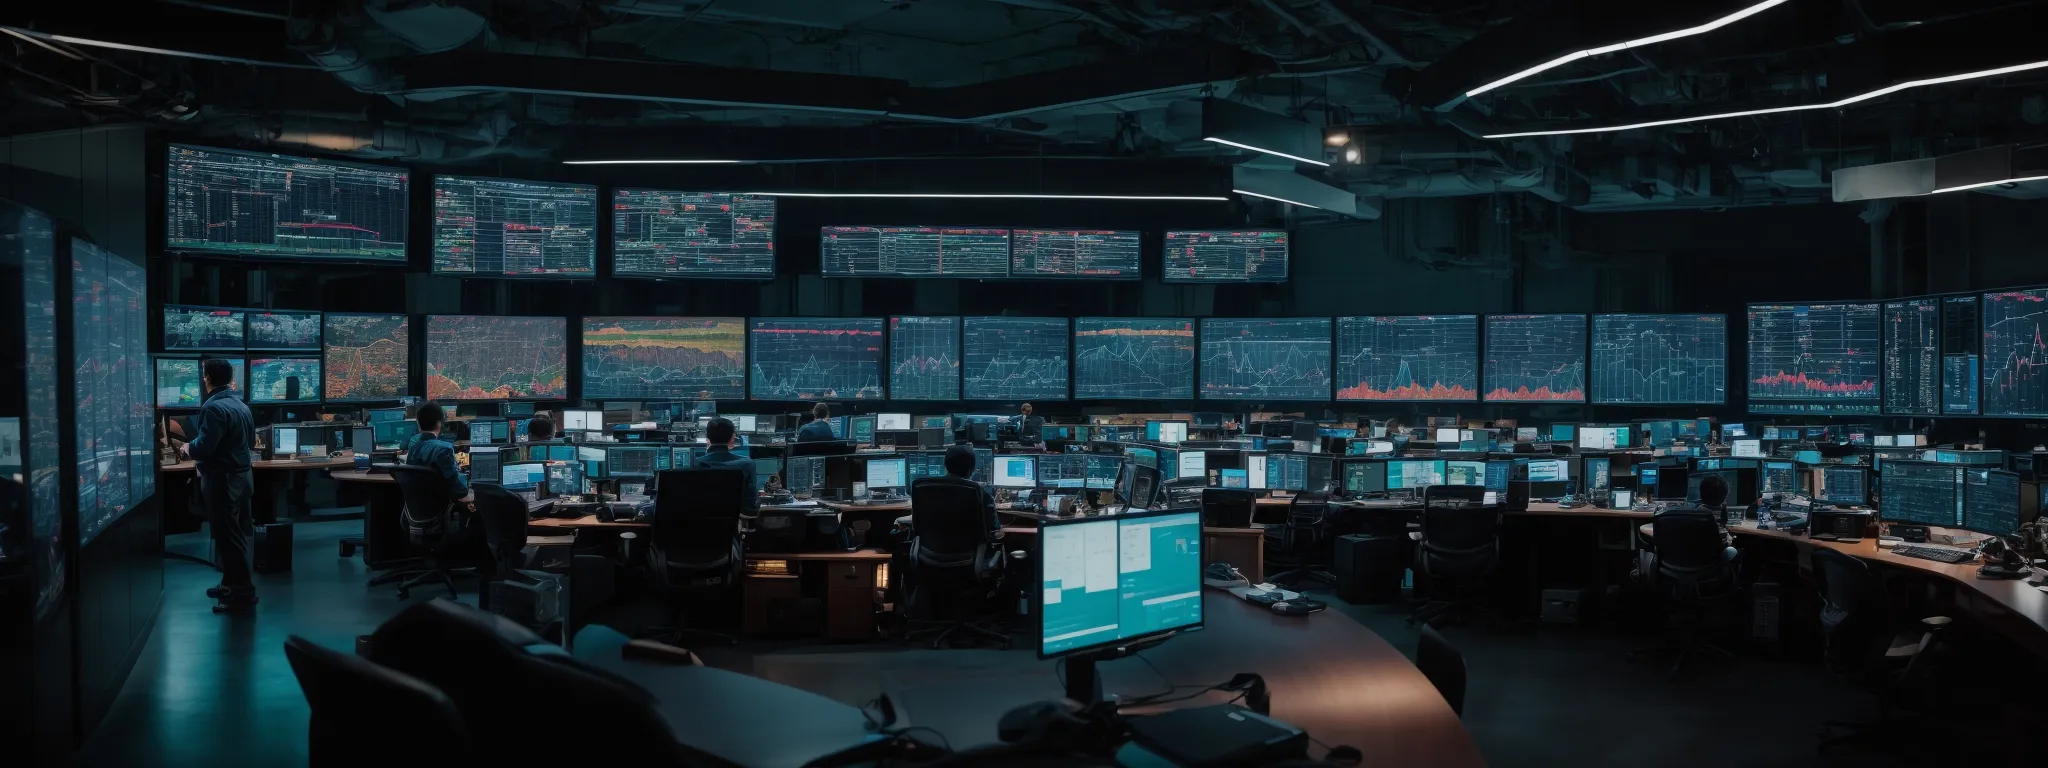 a bustling command center with multiple screens displaying vibrant, fluctuating graphs and statistics.